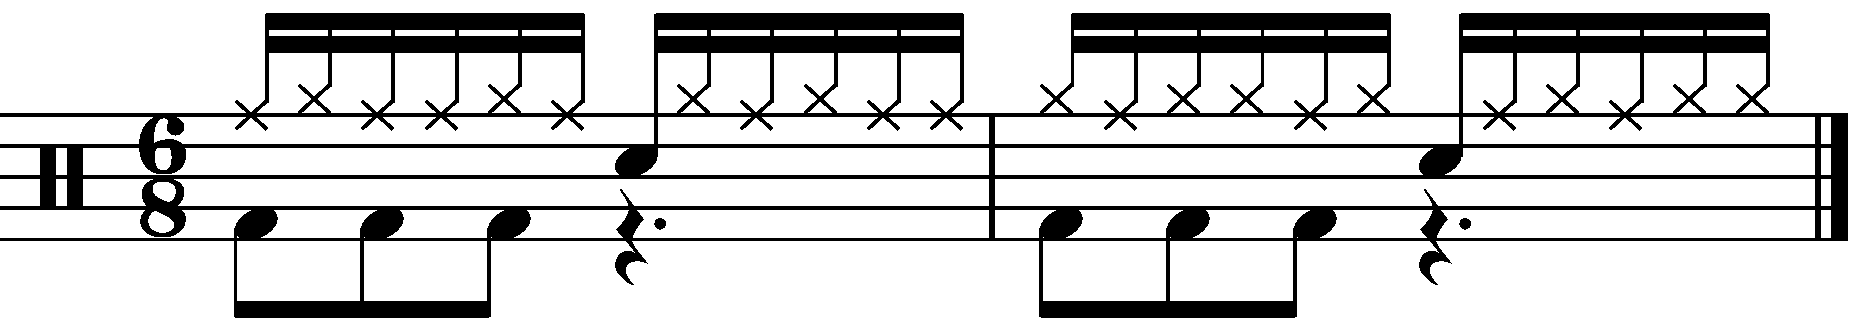 A 6/8 paradiddle groove